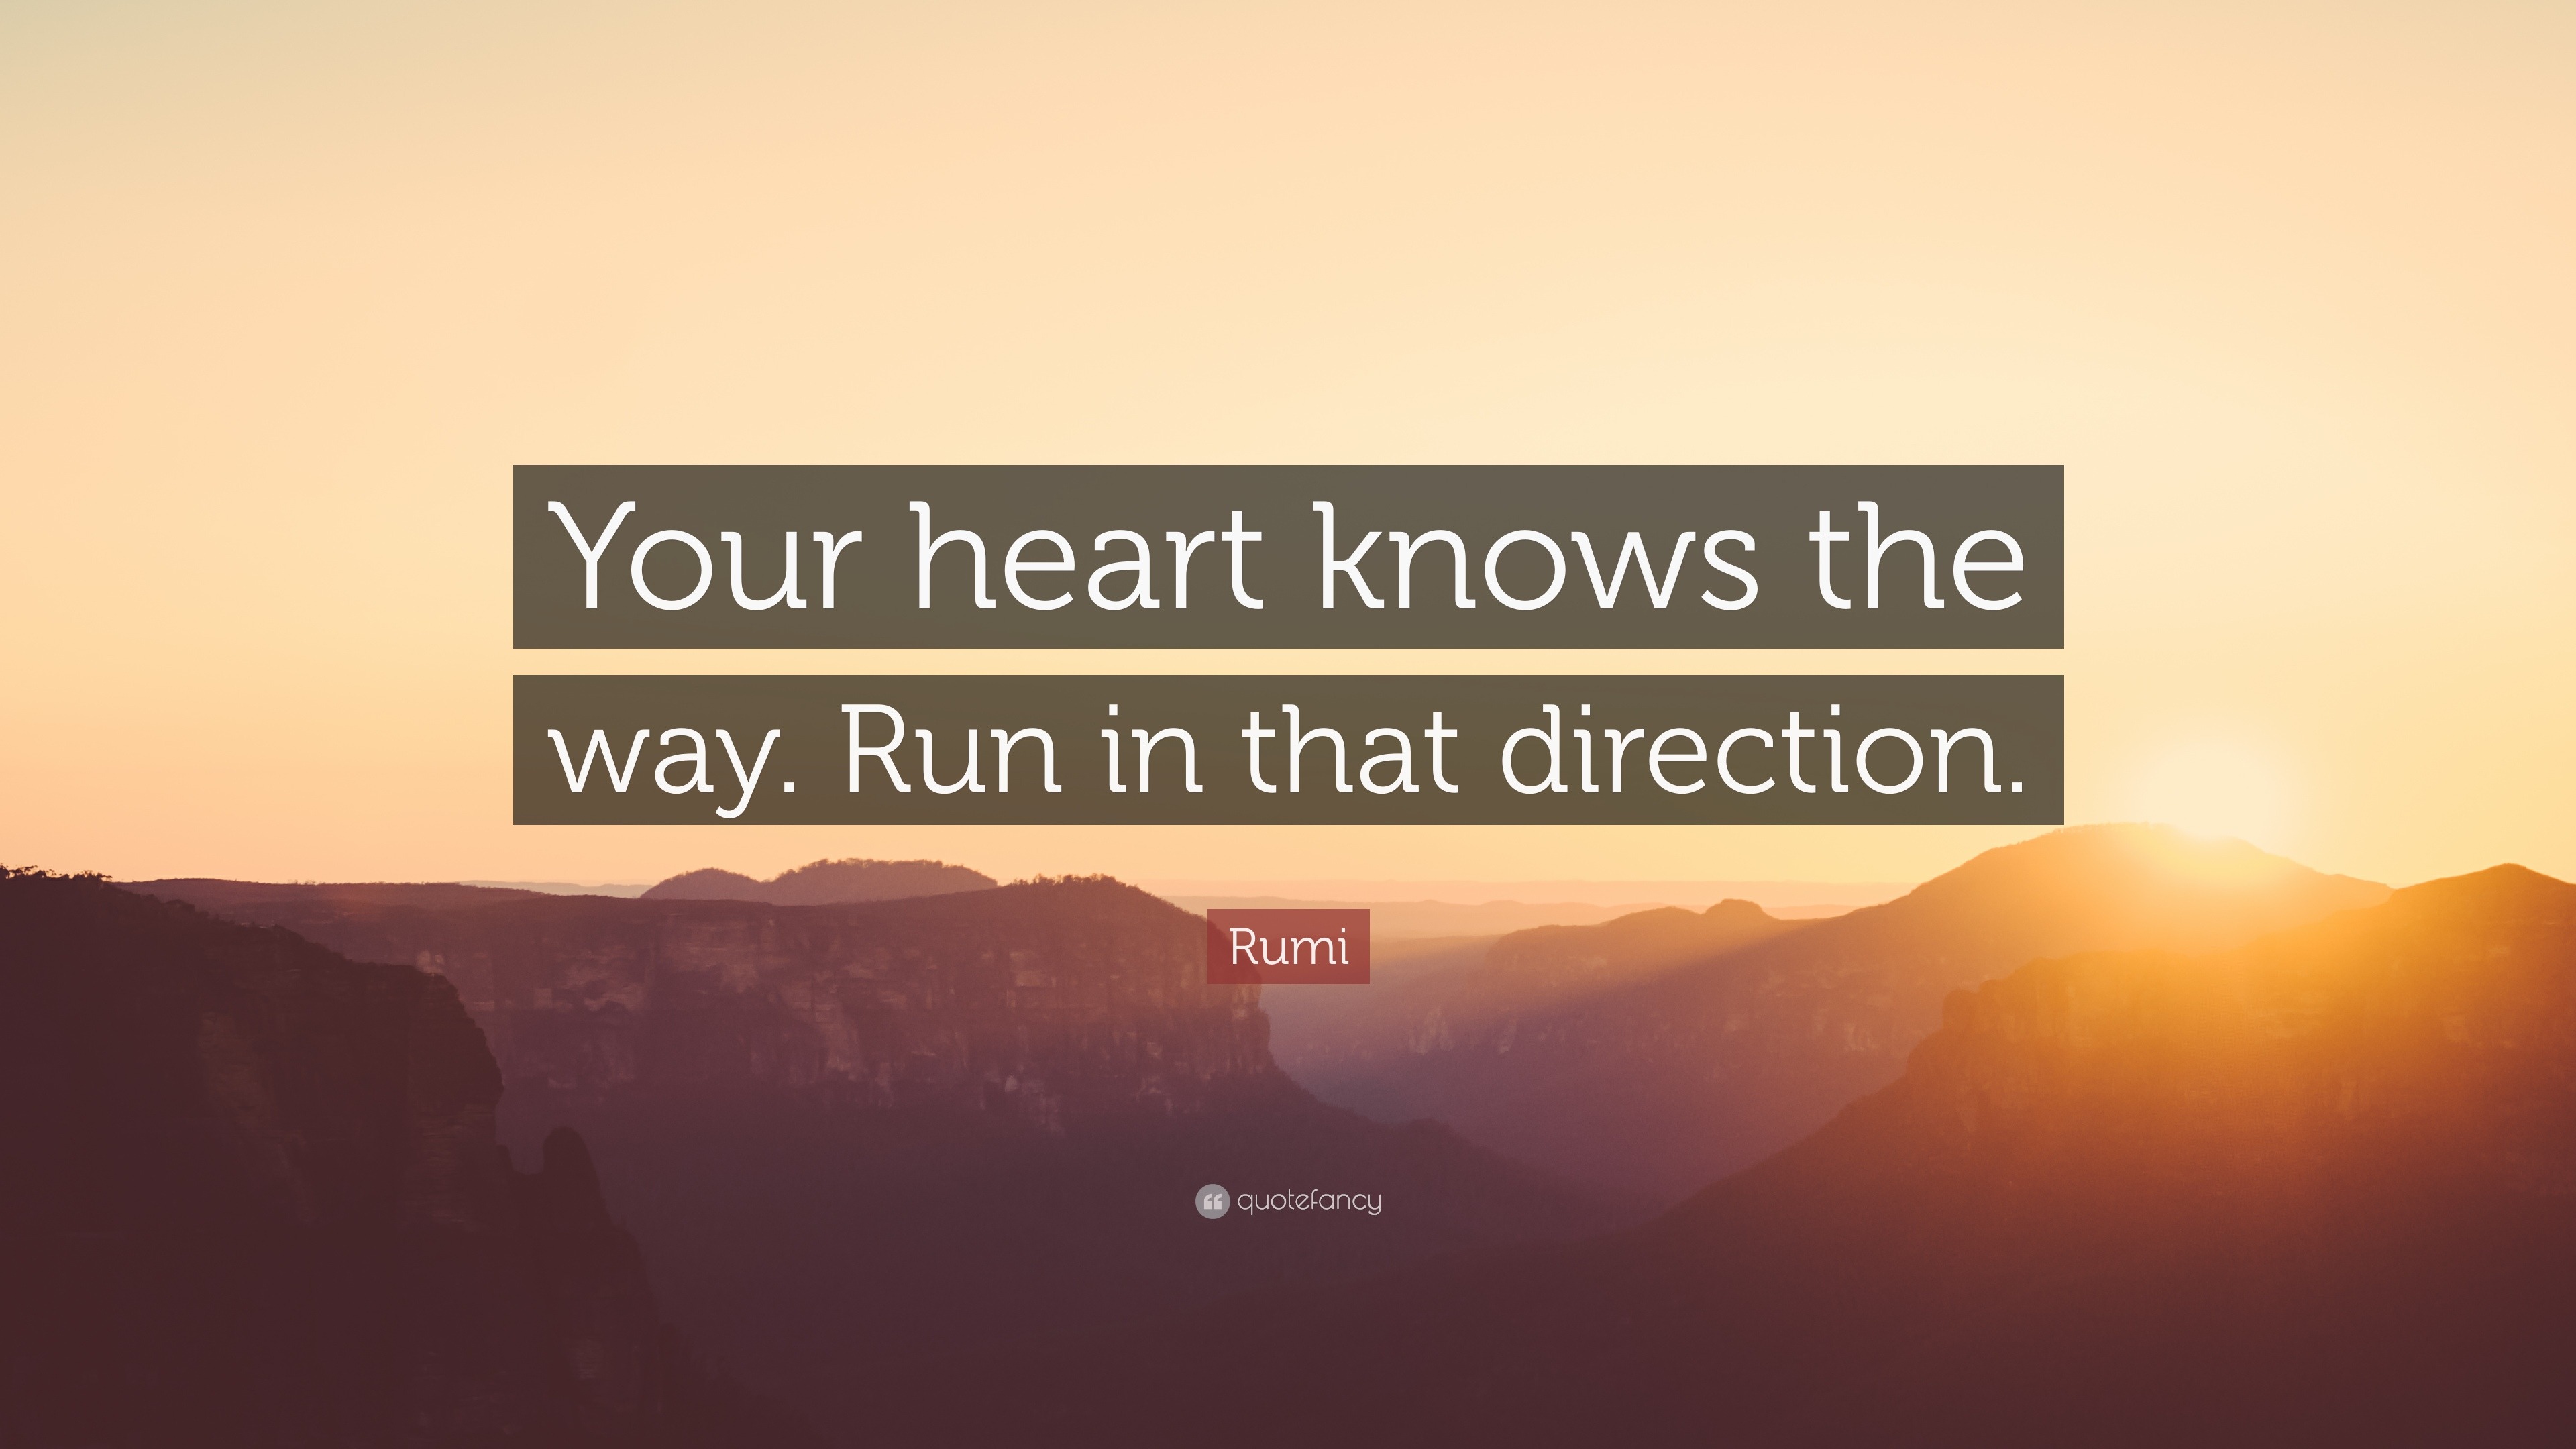 Rumi Quote “Your heart knows the way Run in that direction ”